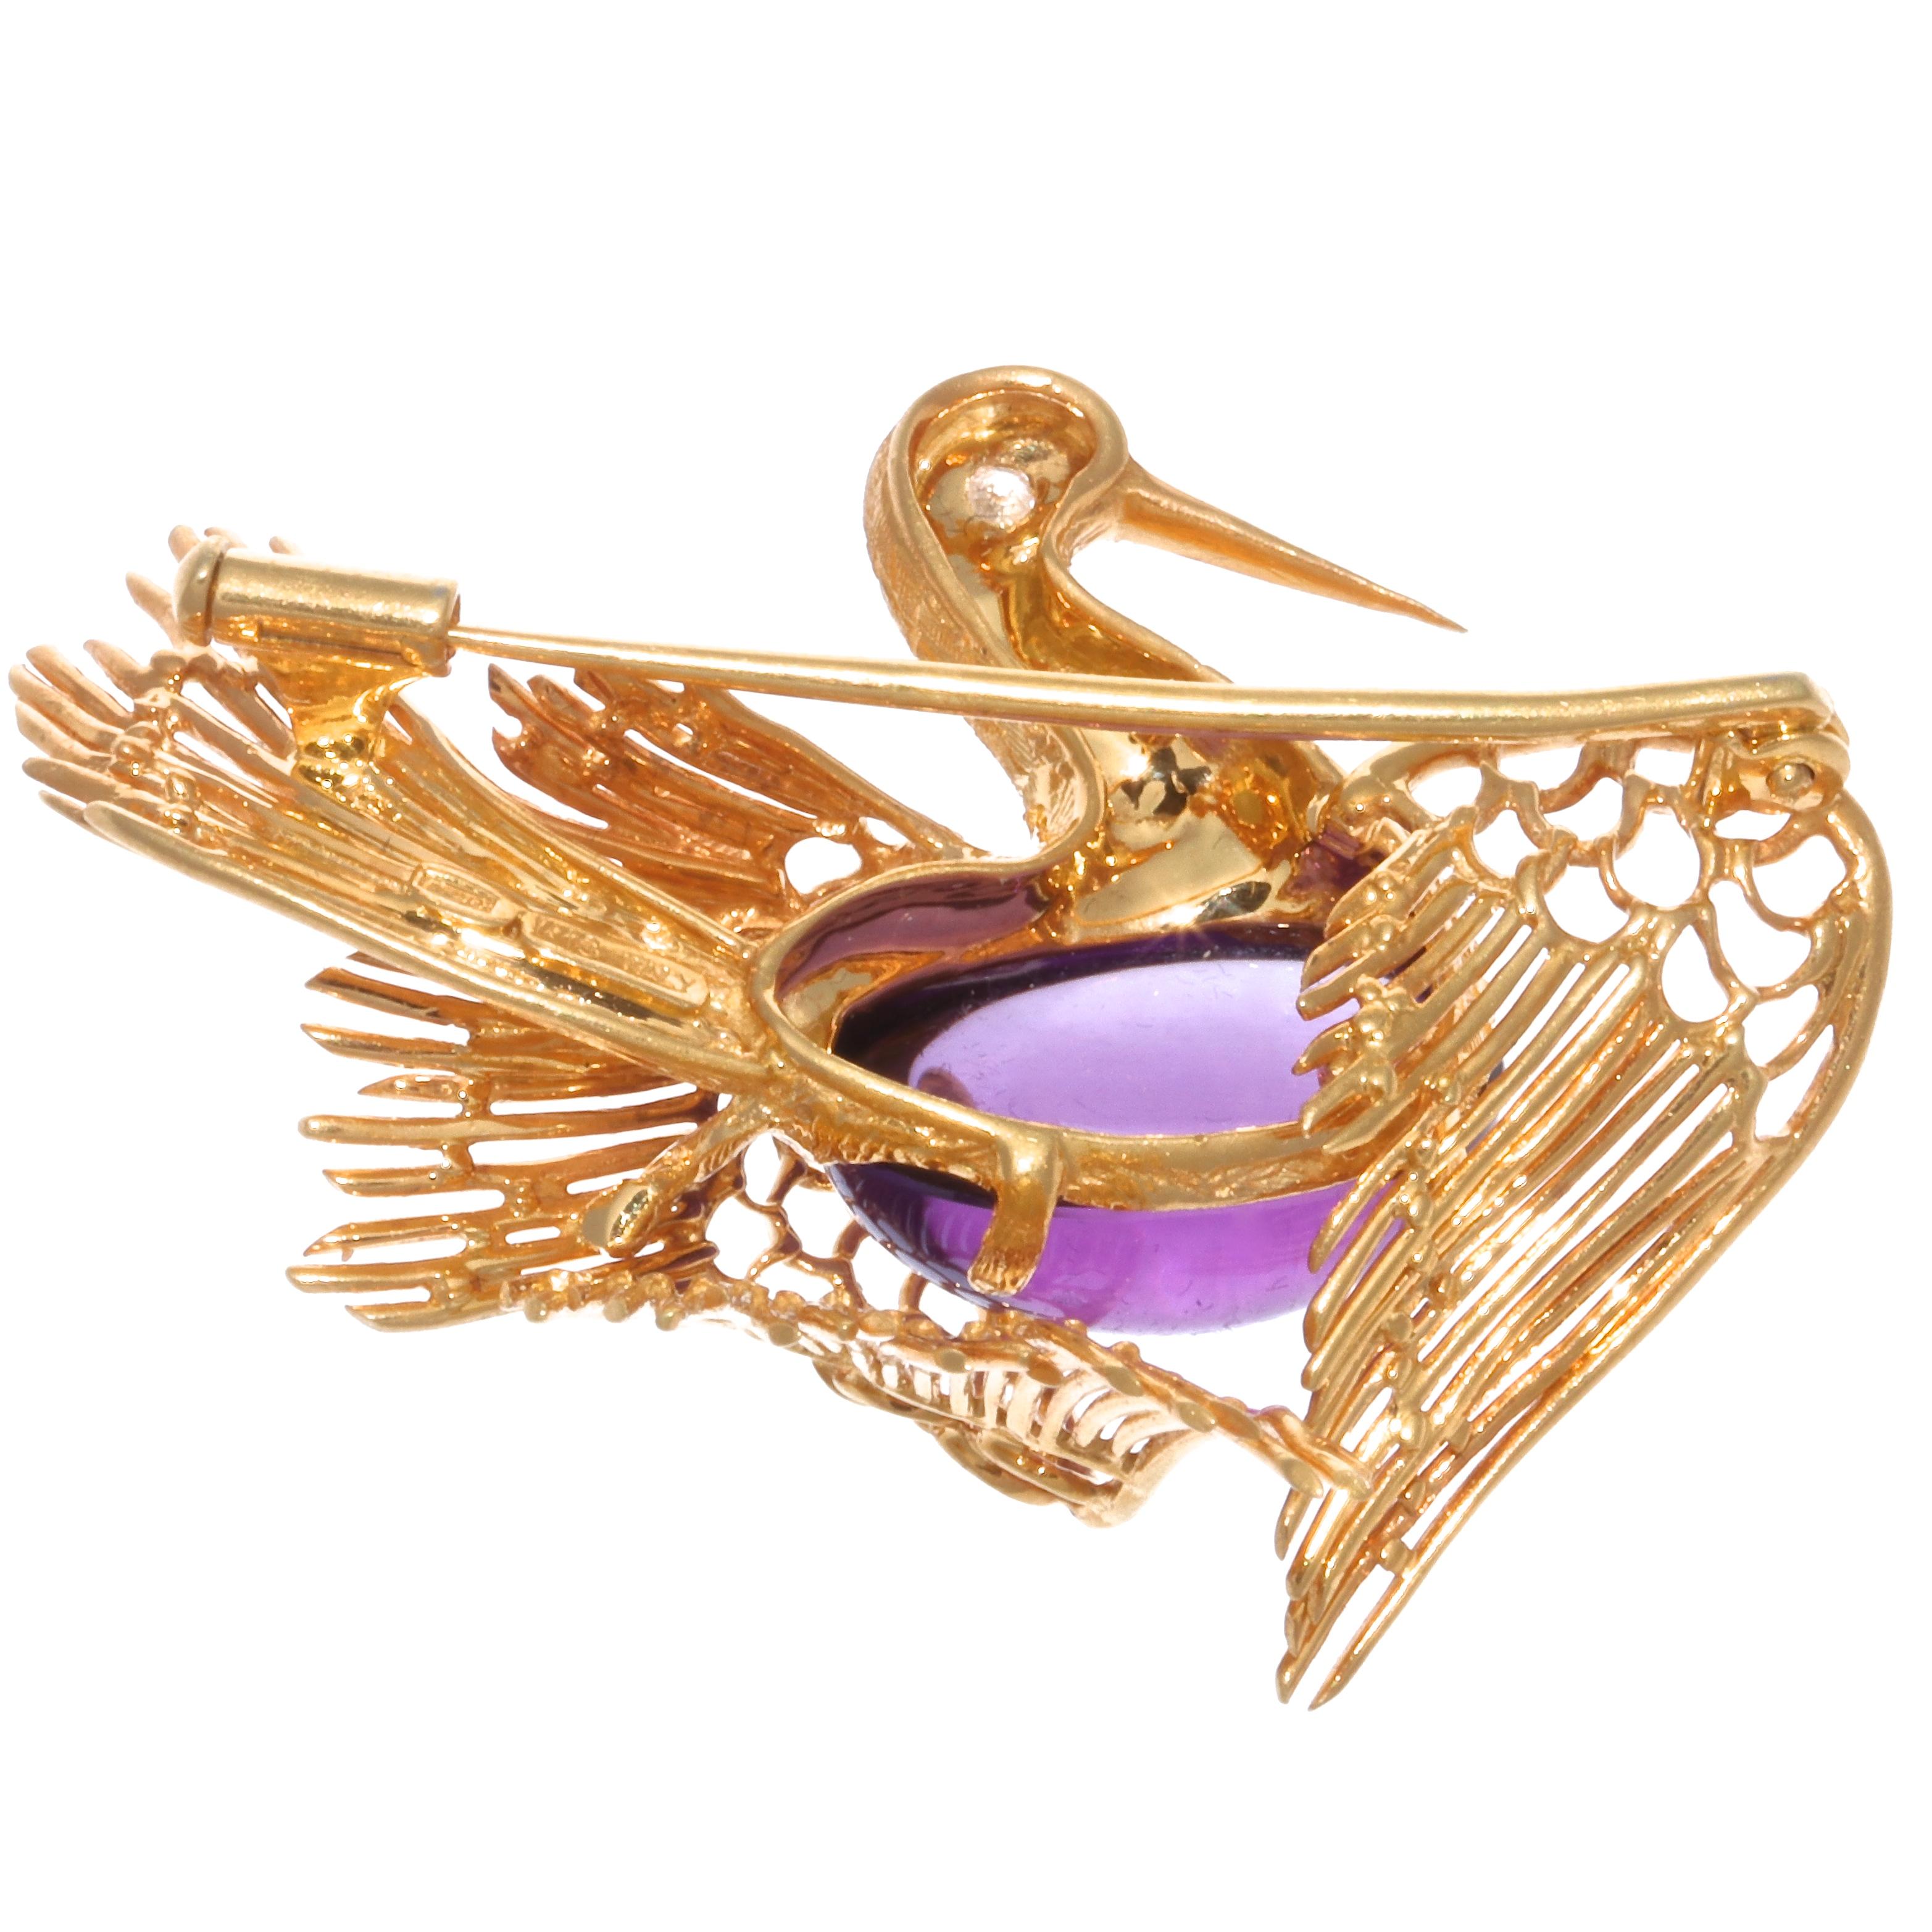 An interesting and graceful Cartier brooch, that would be a great addition to your signed collection. Hallmarked Cartier Italy. The beautiful, vibrant amethyst cabochon is approximately 11.25 carats with a single cut diamond as the eye.